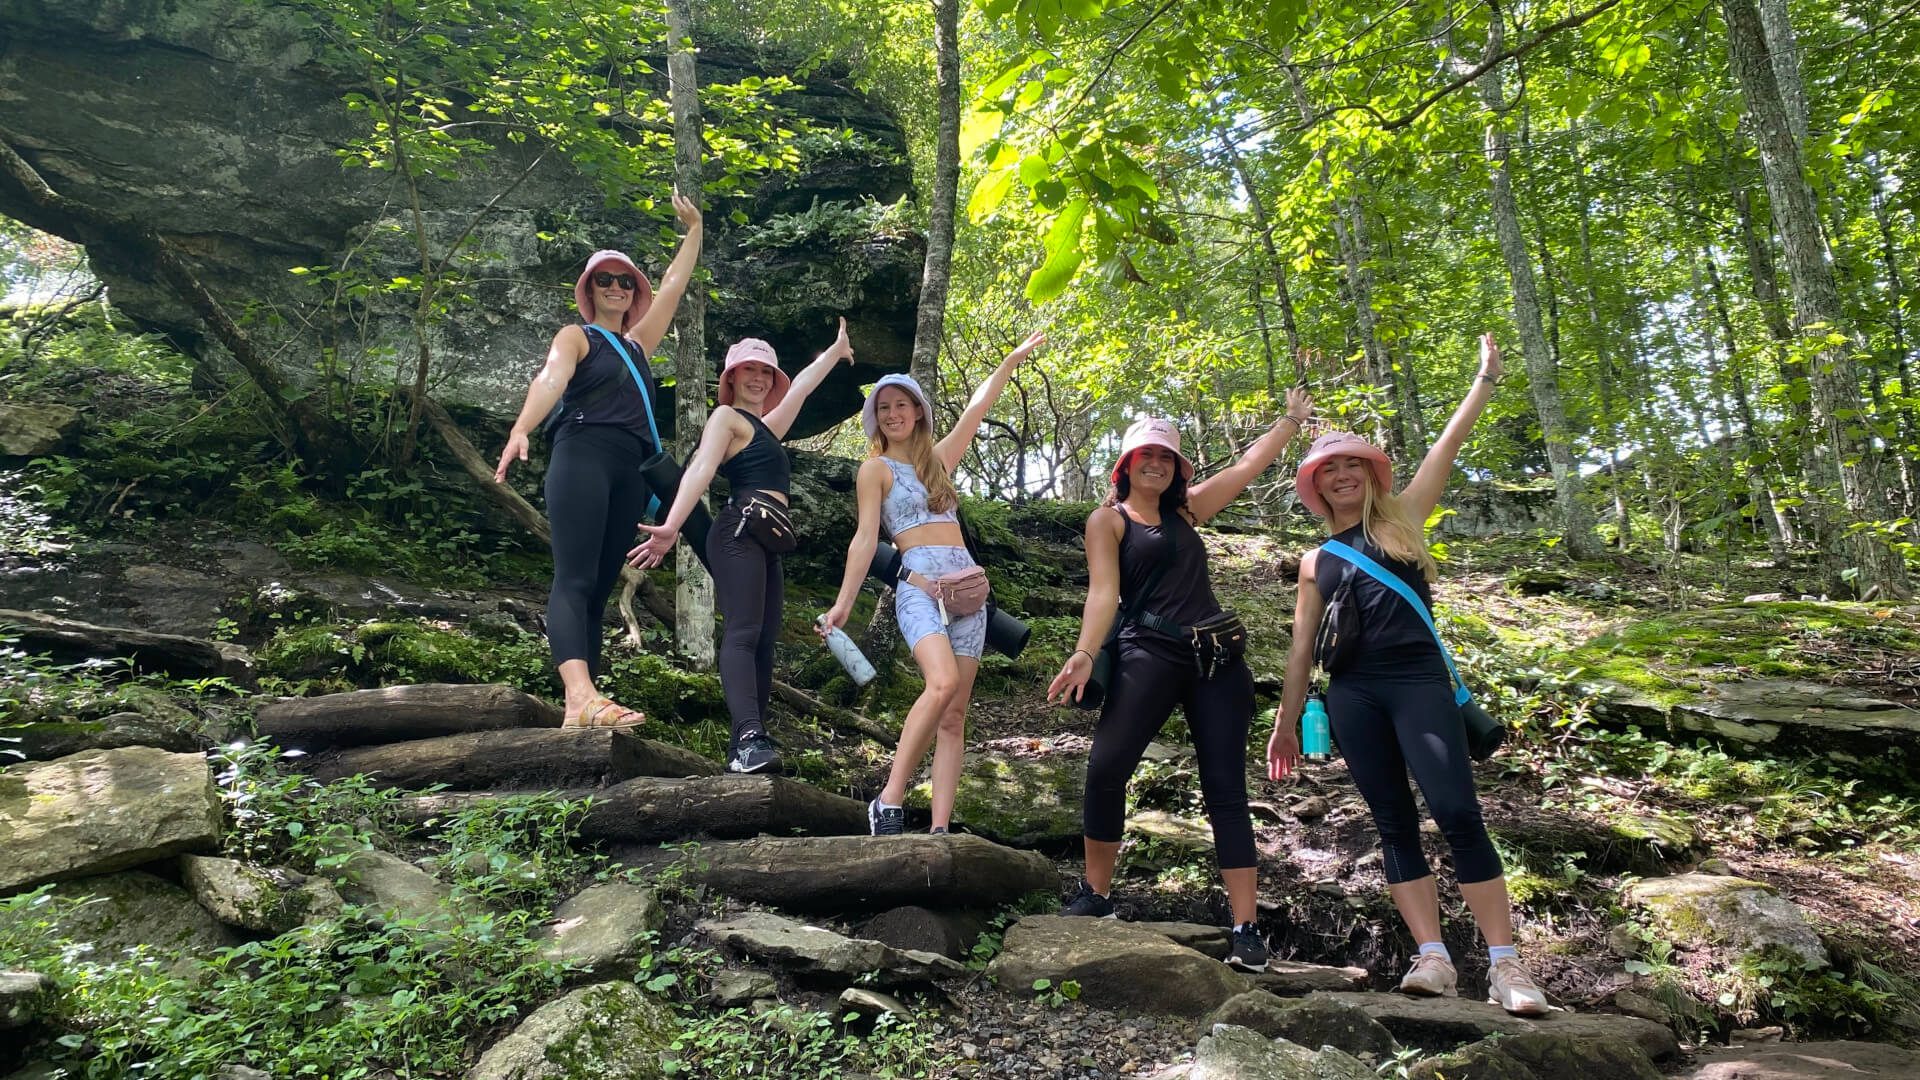 Bachelorette party yoga hike in Asheville, NC.